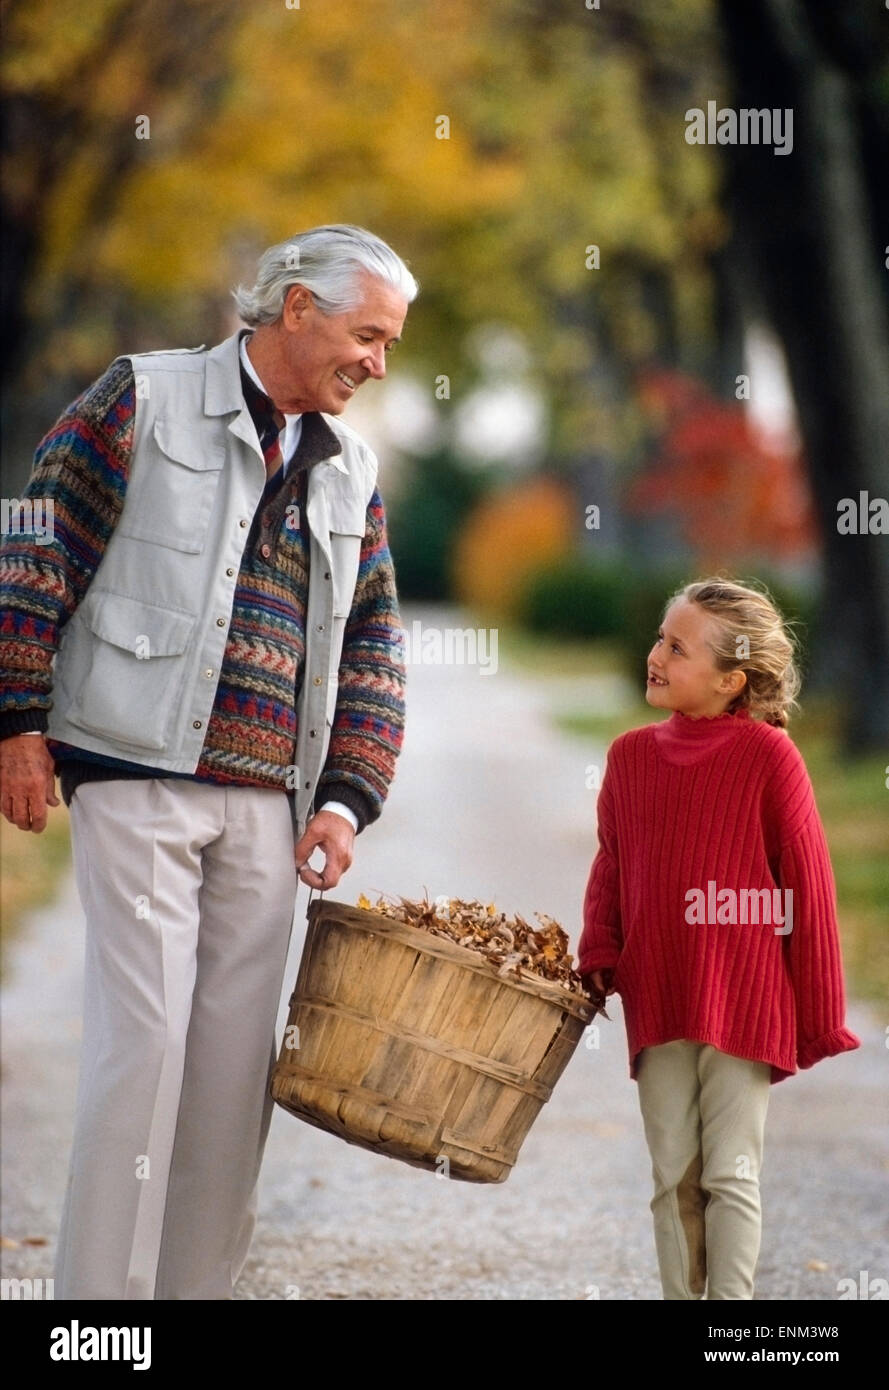 grandfather and granddaughter enjoying carrying basket of leaves Stock Photo